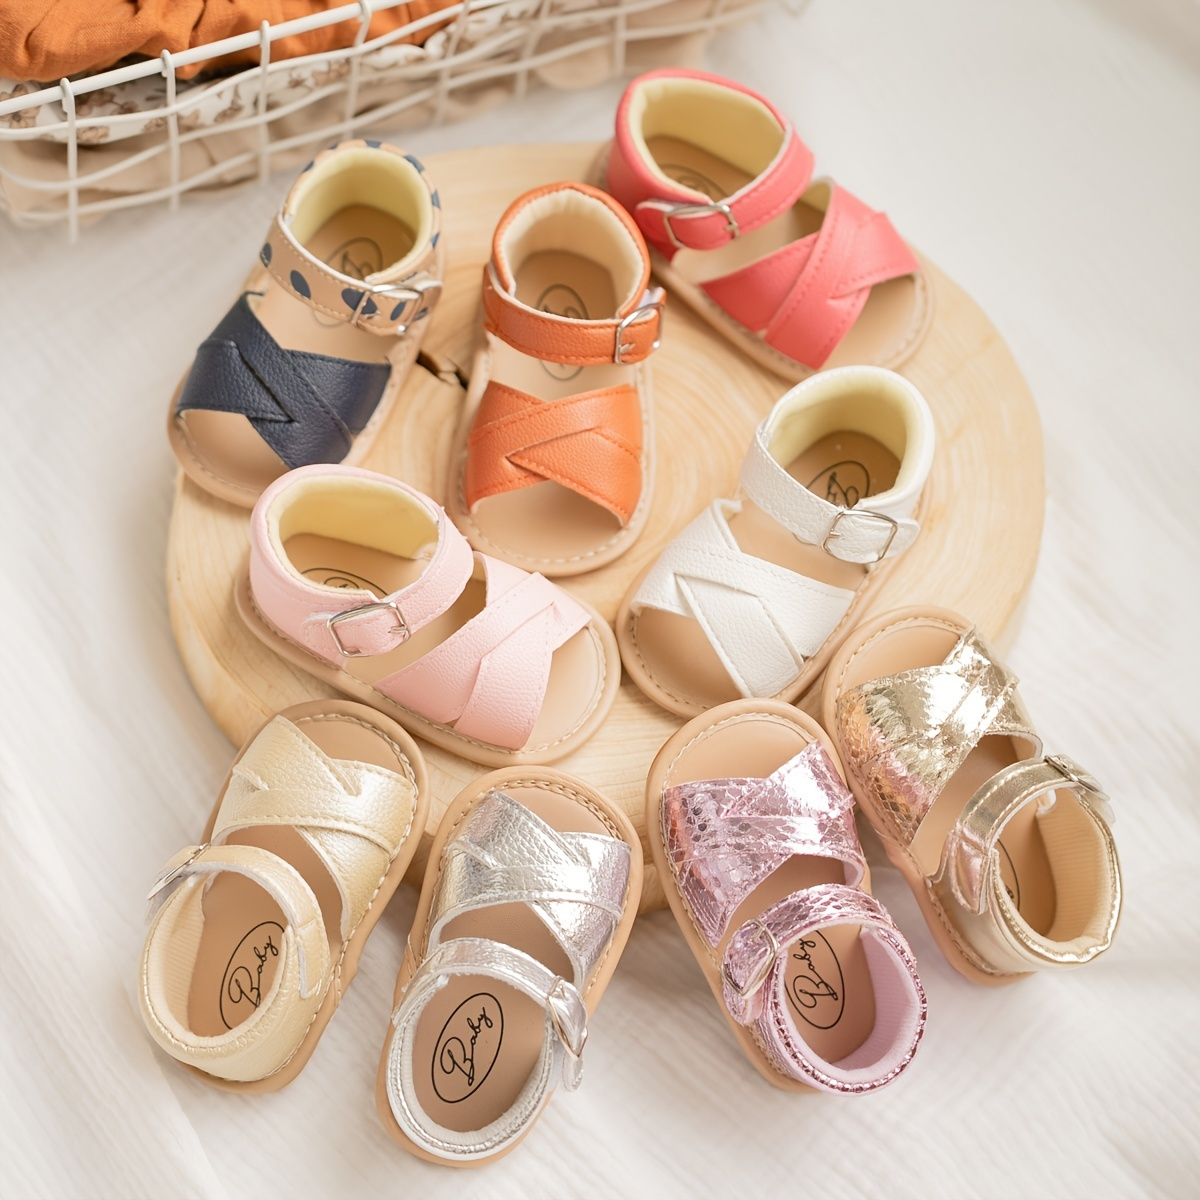 Buy Baby Shoes & Baby Slippers Online in UAE | KIABI-sgquangbinhtourist.com.vn